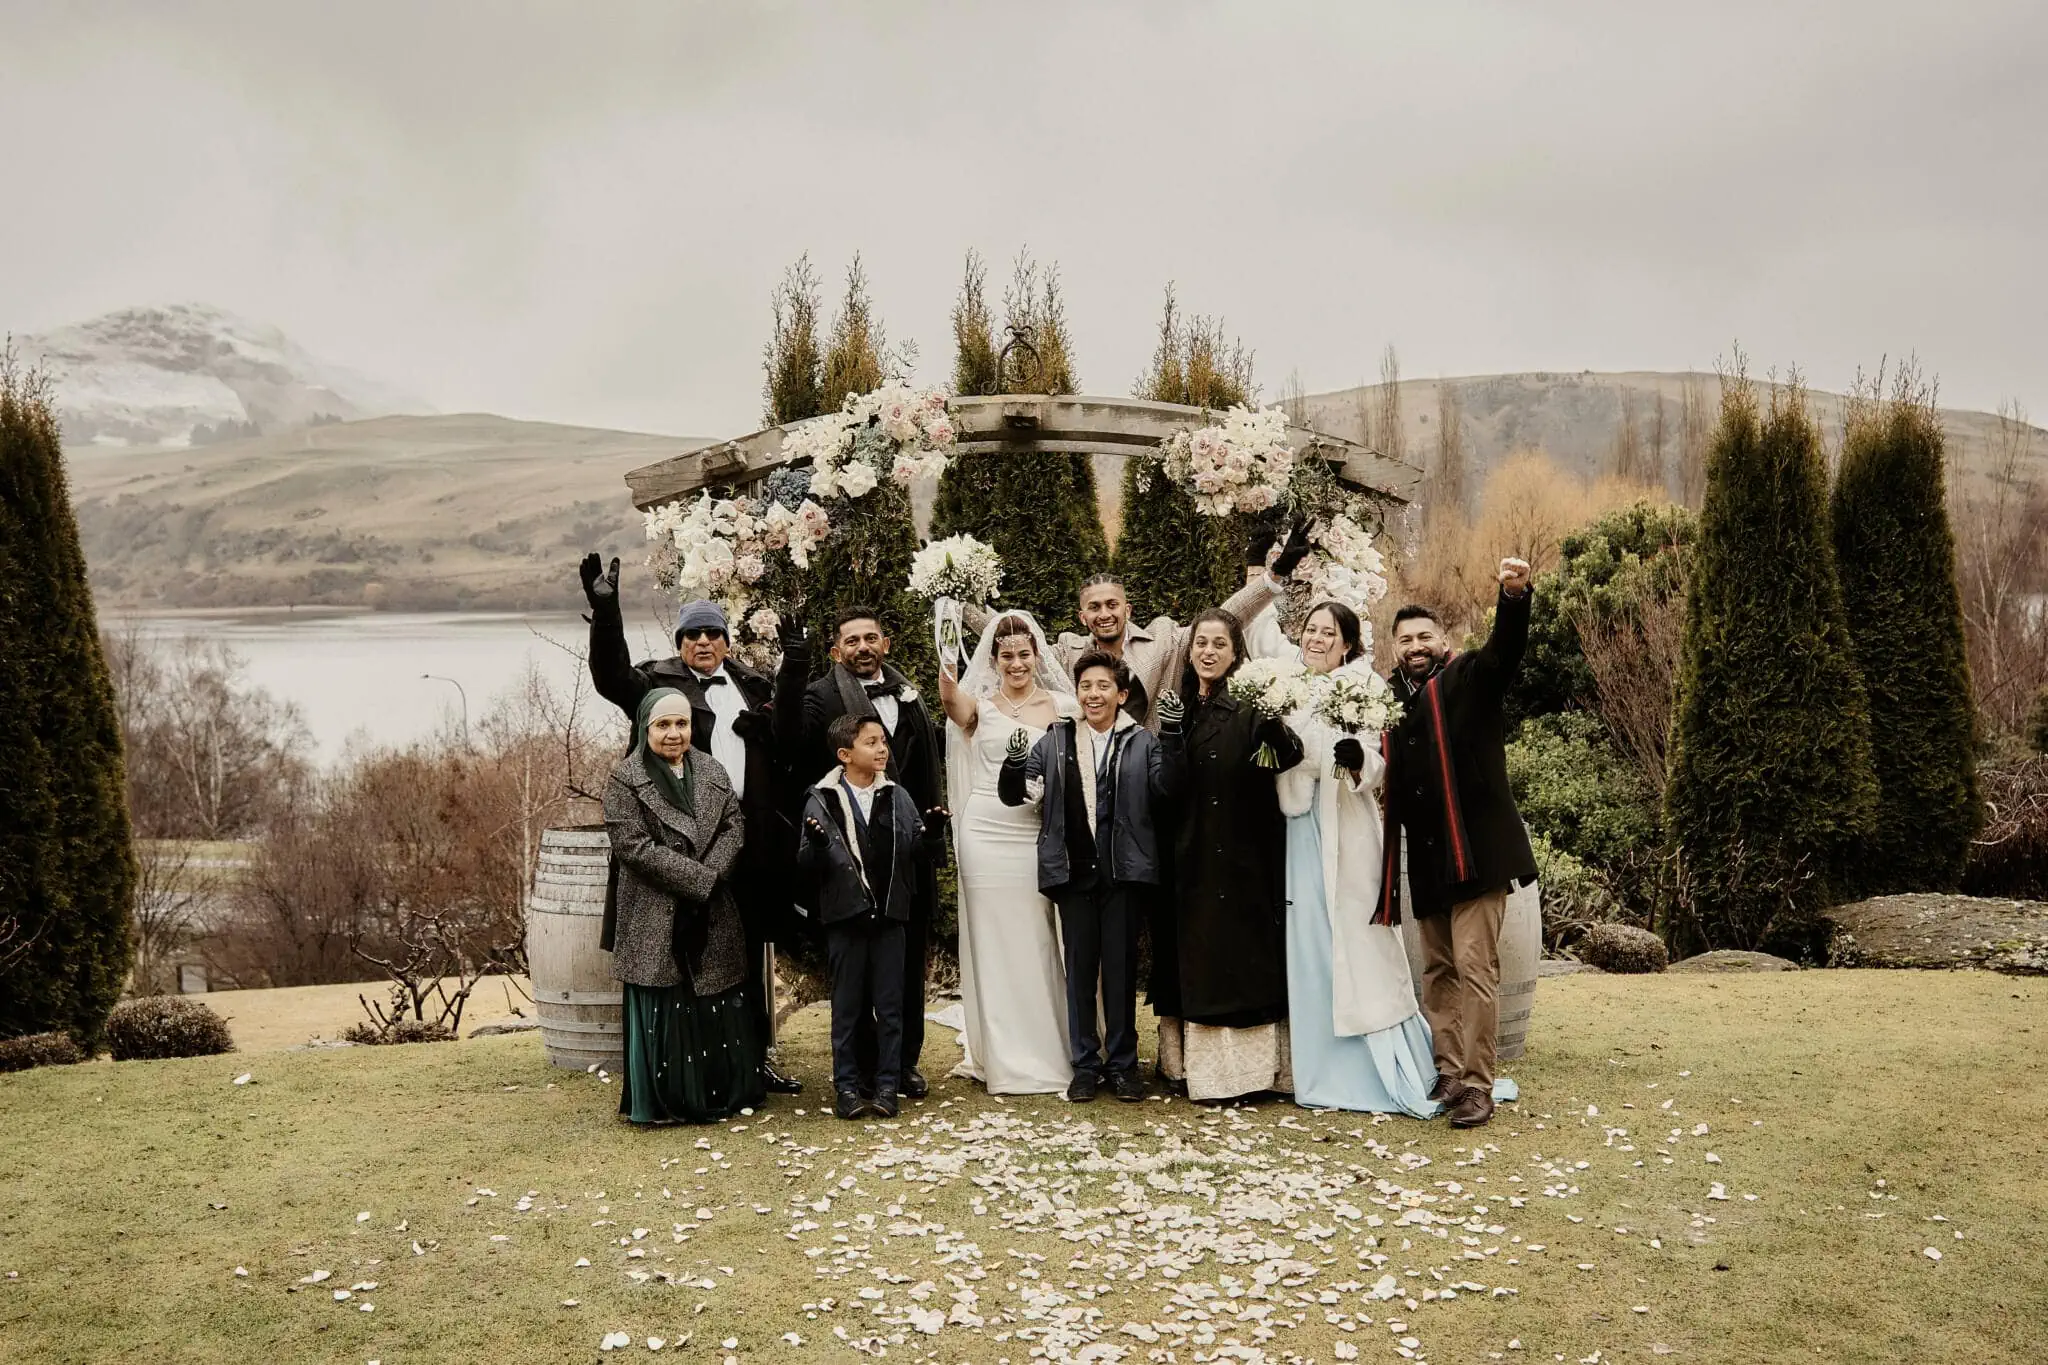 Queenstown New Zealand Elopement Wedding Photographer - Wasim and Yumn, a wedding party, poses for a photo in front of a lake at Queenstown Islamic Wedding.